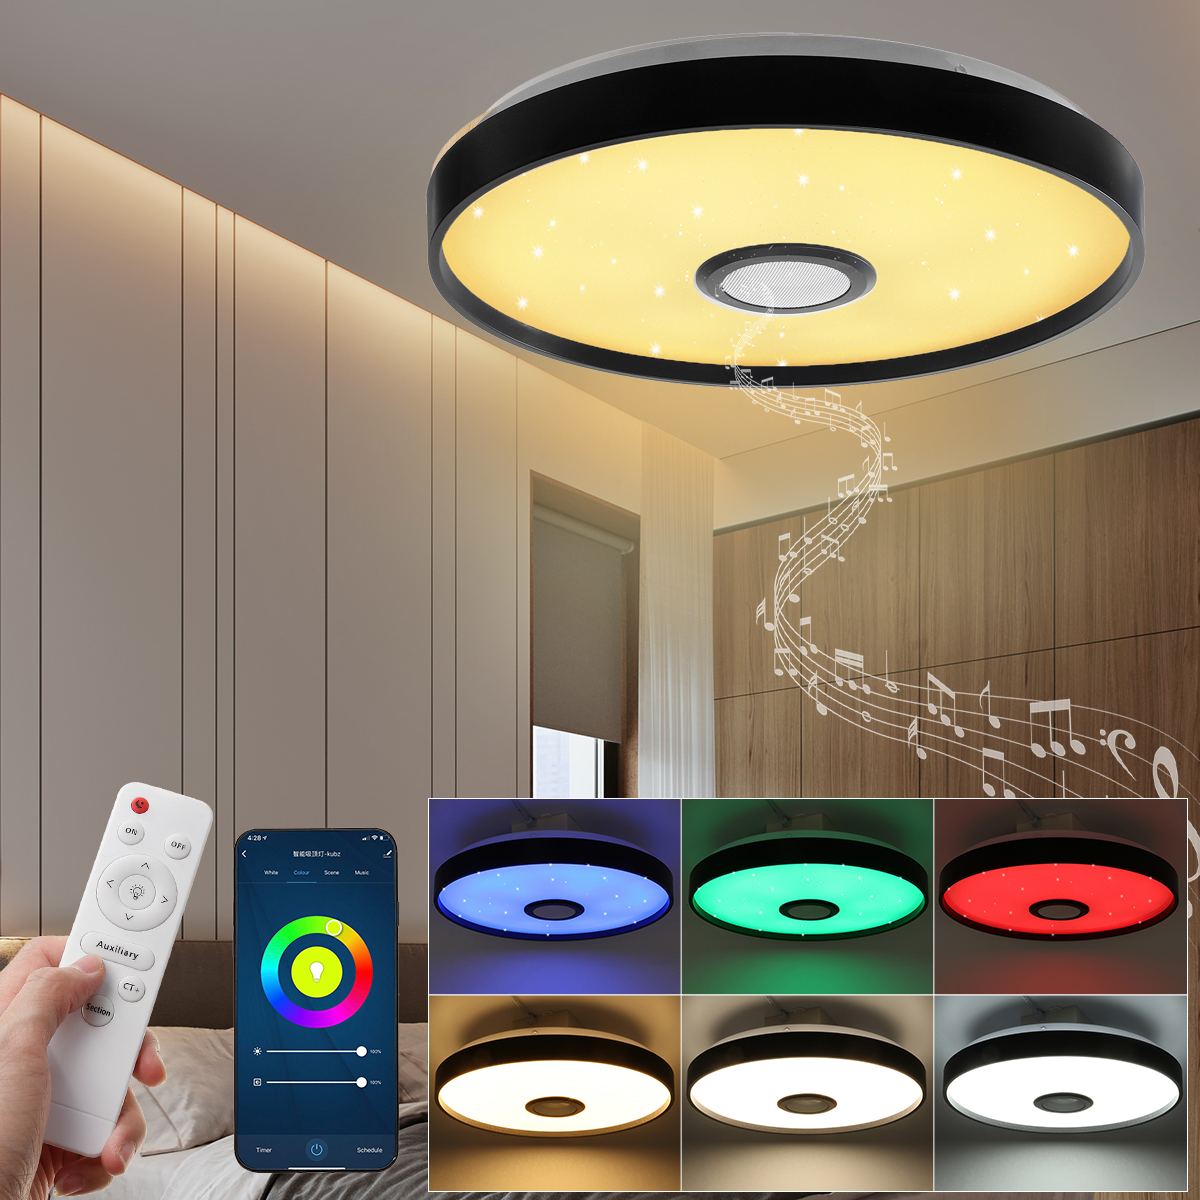 Dimmable-36W-RGB-LED-Ceiling-Light-Lamp-bluetooth-WIFI-Alexa--Google-Home--Remote-1758787-3